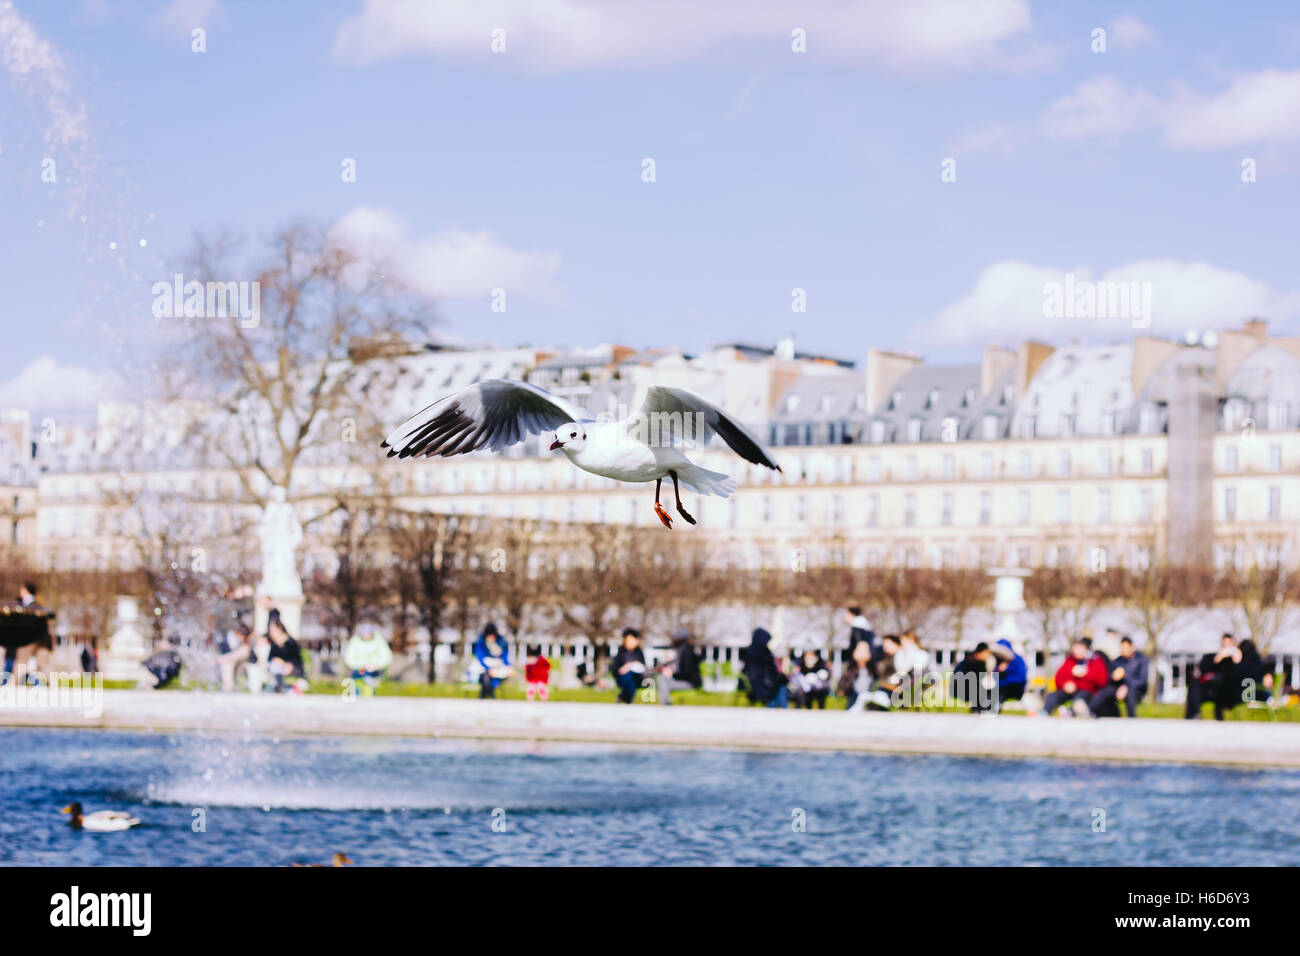 A seagull flying in the gardens of the Louvre in Paris Stock Photo